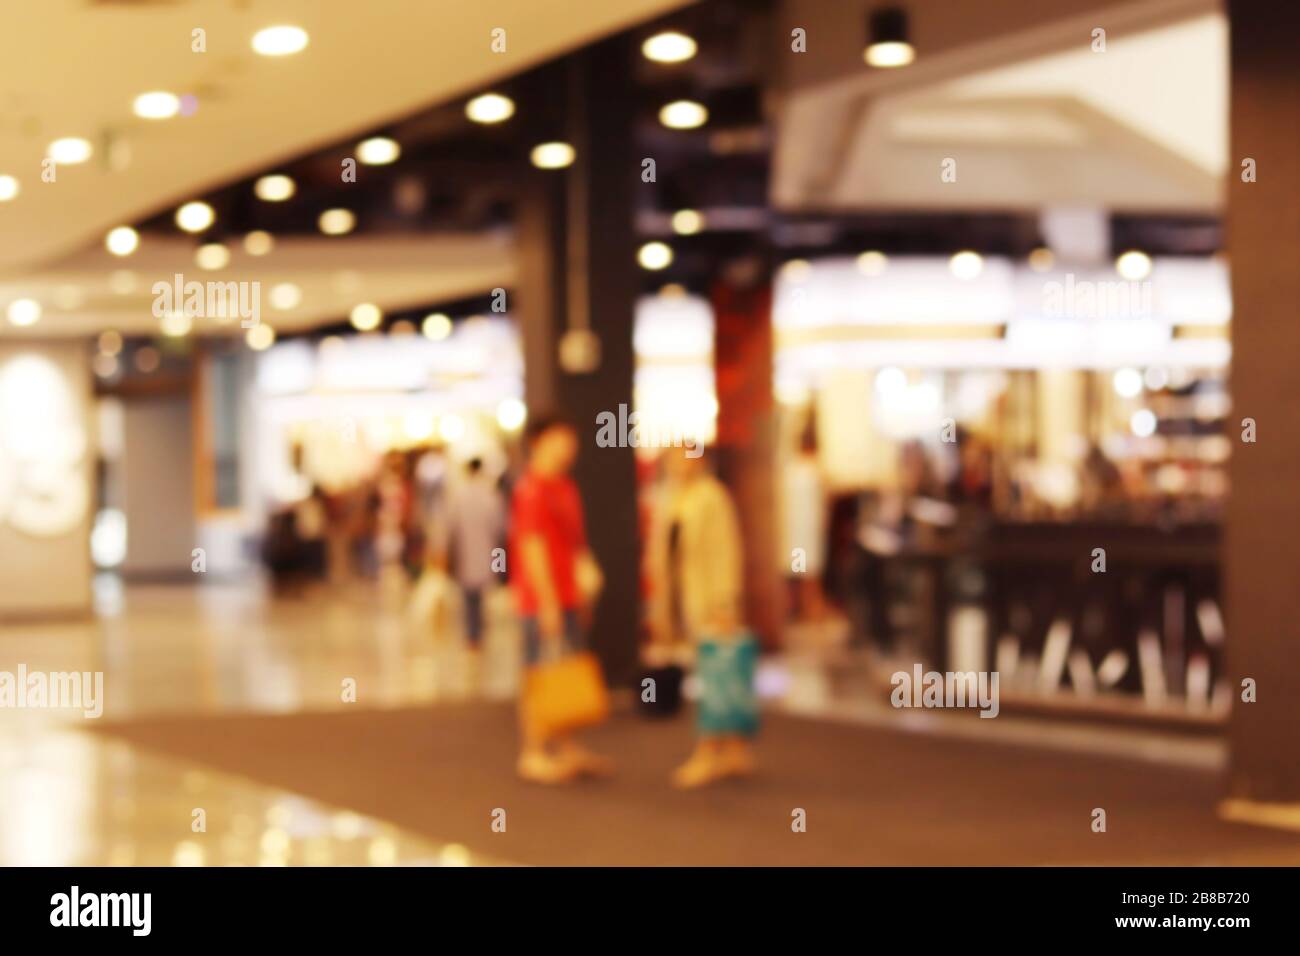 Blurred Photo Inside Clothes Shop Sale Stock Photo 723604378